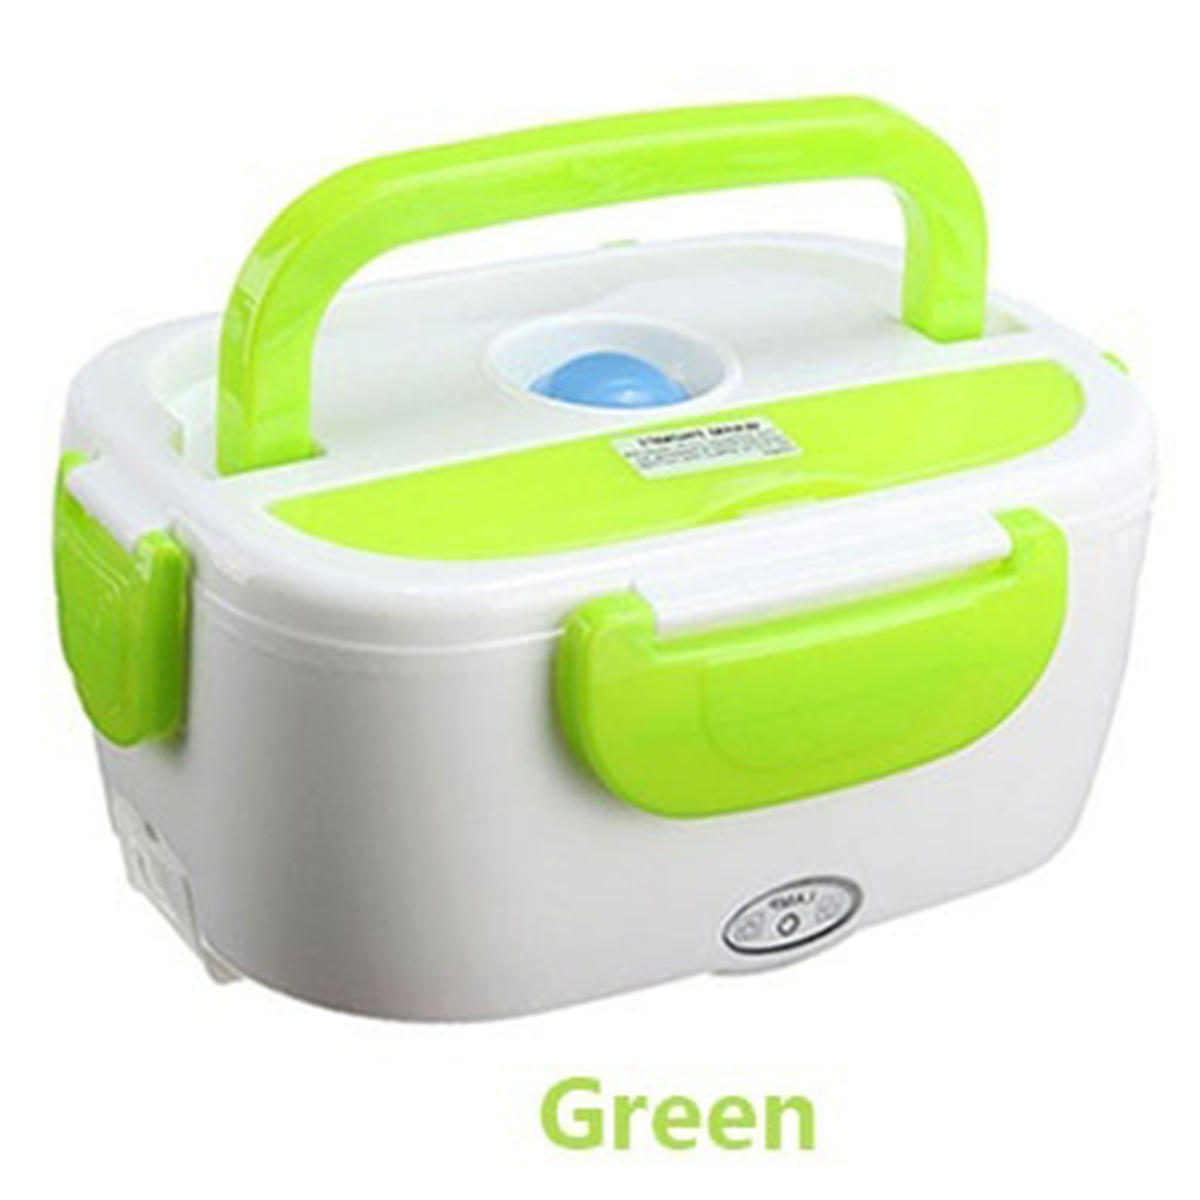 Portable 1.1L Car Electric Heating Lunch Box Storage Container Food Warm Heater US EU Plug